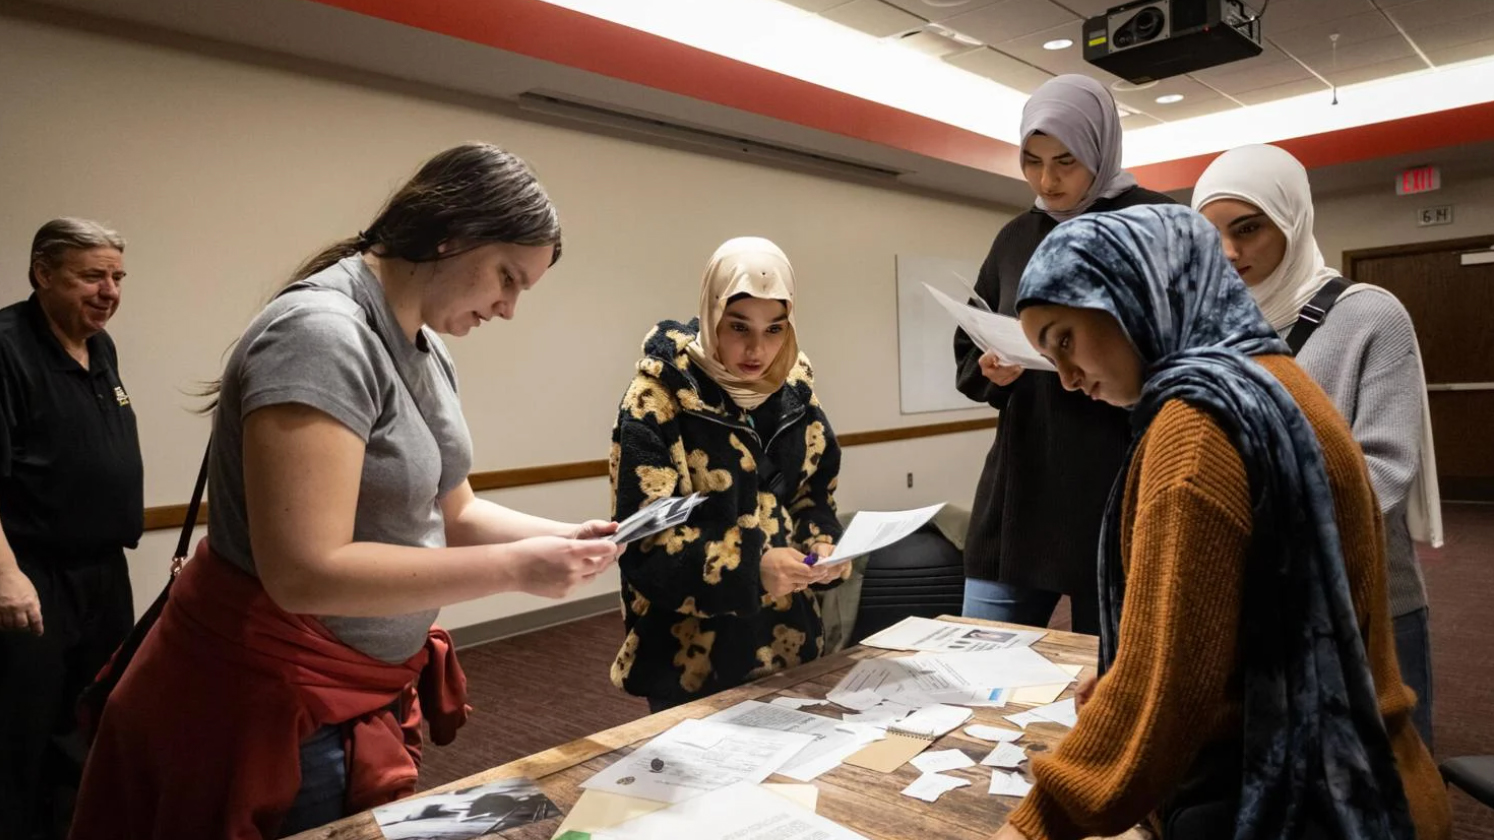 A group of students attempt to solve the escape room together during Campus Nightlife’s Mystery and Crime Escape Rooms and Video Games event at the East Campus Union on Friday, March 3, 2023, in Lincoln, Nebraska. [photo by Sophia Walsh | Daily Nebraskan]